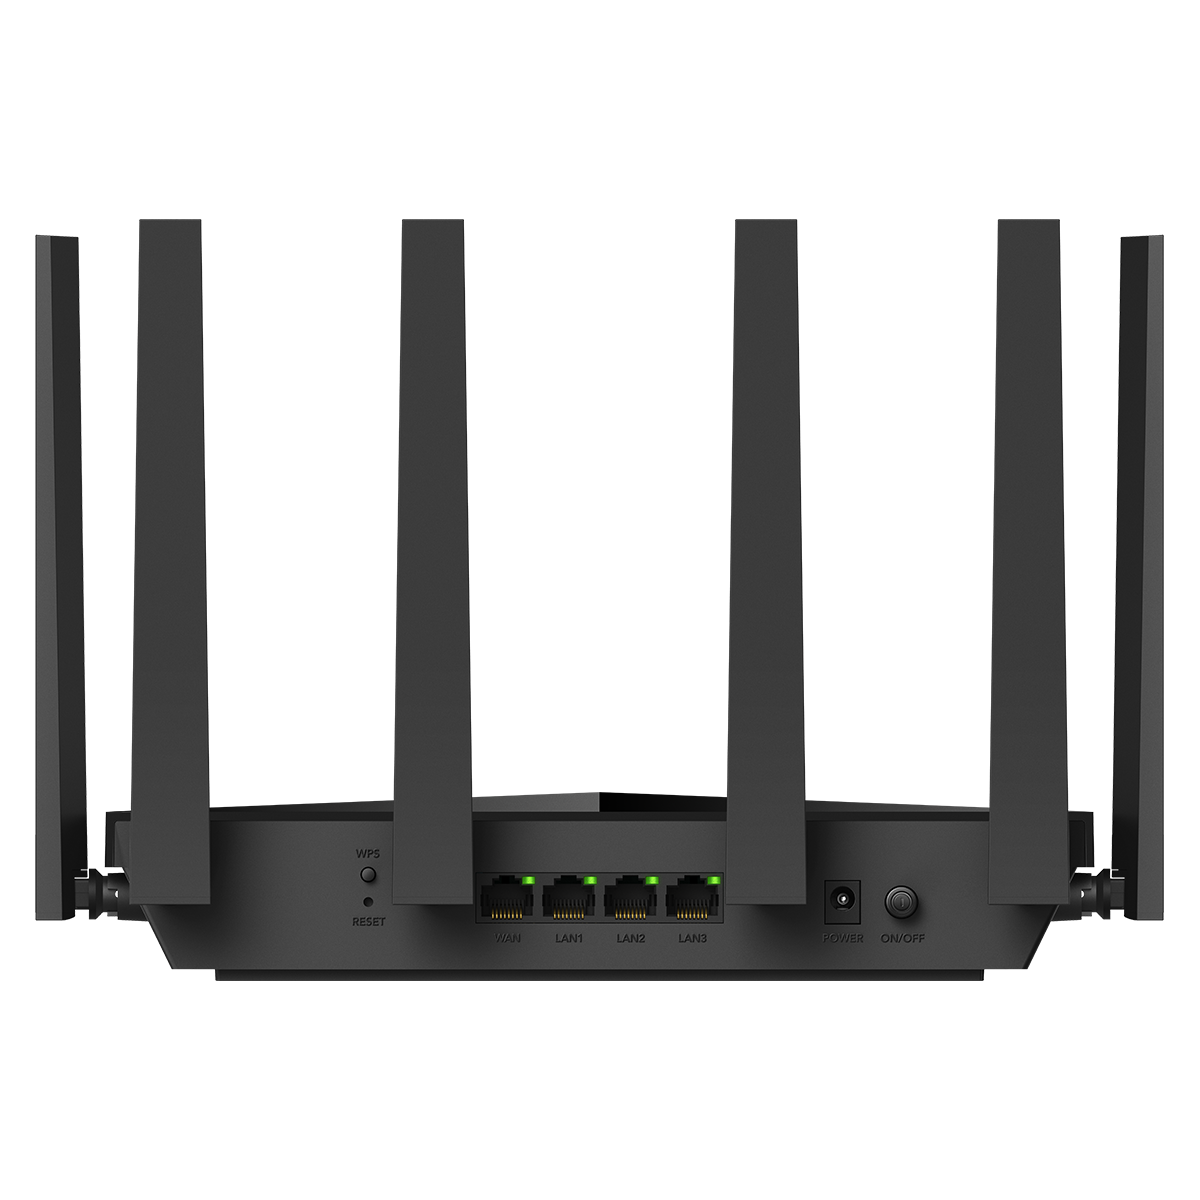 BE11000 2.5G Mesh Wi-Fi 7 Router, WR11000 1.0